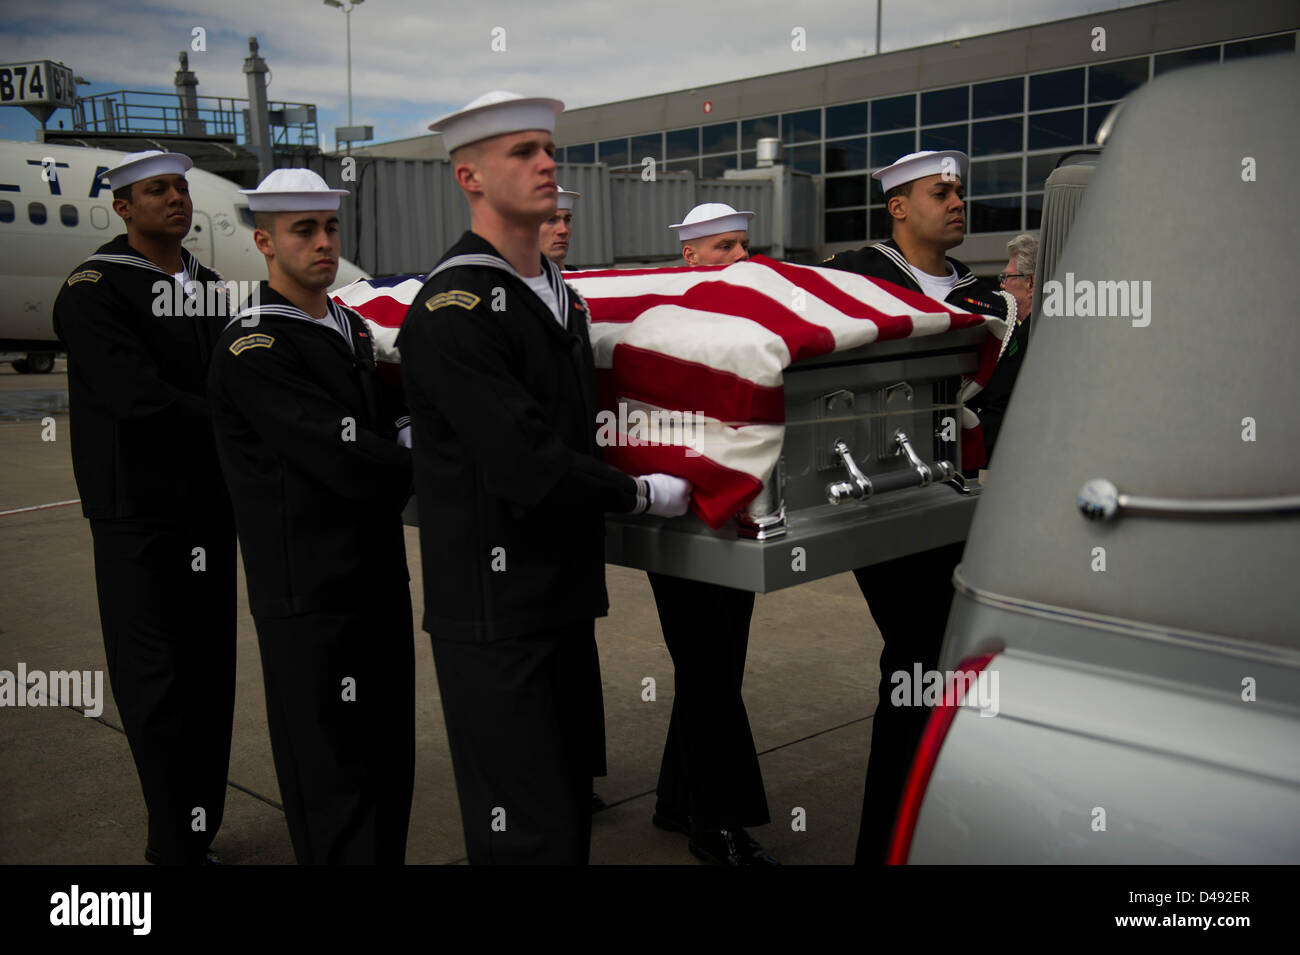 Members of the US Navy Ceremonial Guard conduct a dignified transfer of remains ceremony at Washington Dulles International Airport for one of two Sailors recovered from the Civil War ironclad USS Monitor March 6, 2013 in Sterling, Virginia. The Monitor sank off Cape Hatteras, NC in 1862. The two Sailors will be interred with full military honors at Arlington National Cemetery. Stock Photo